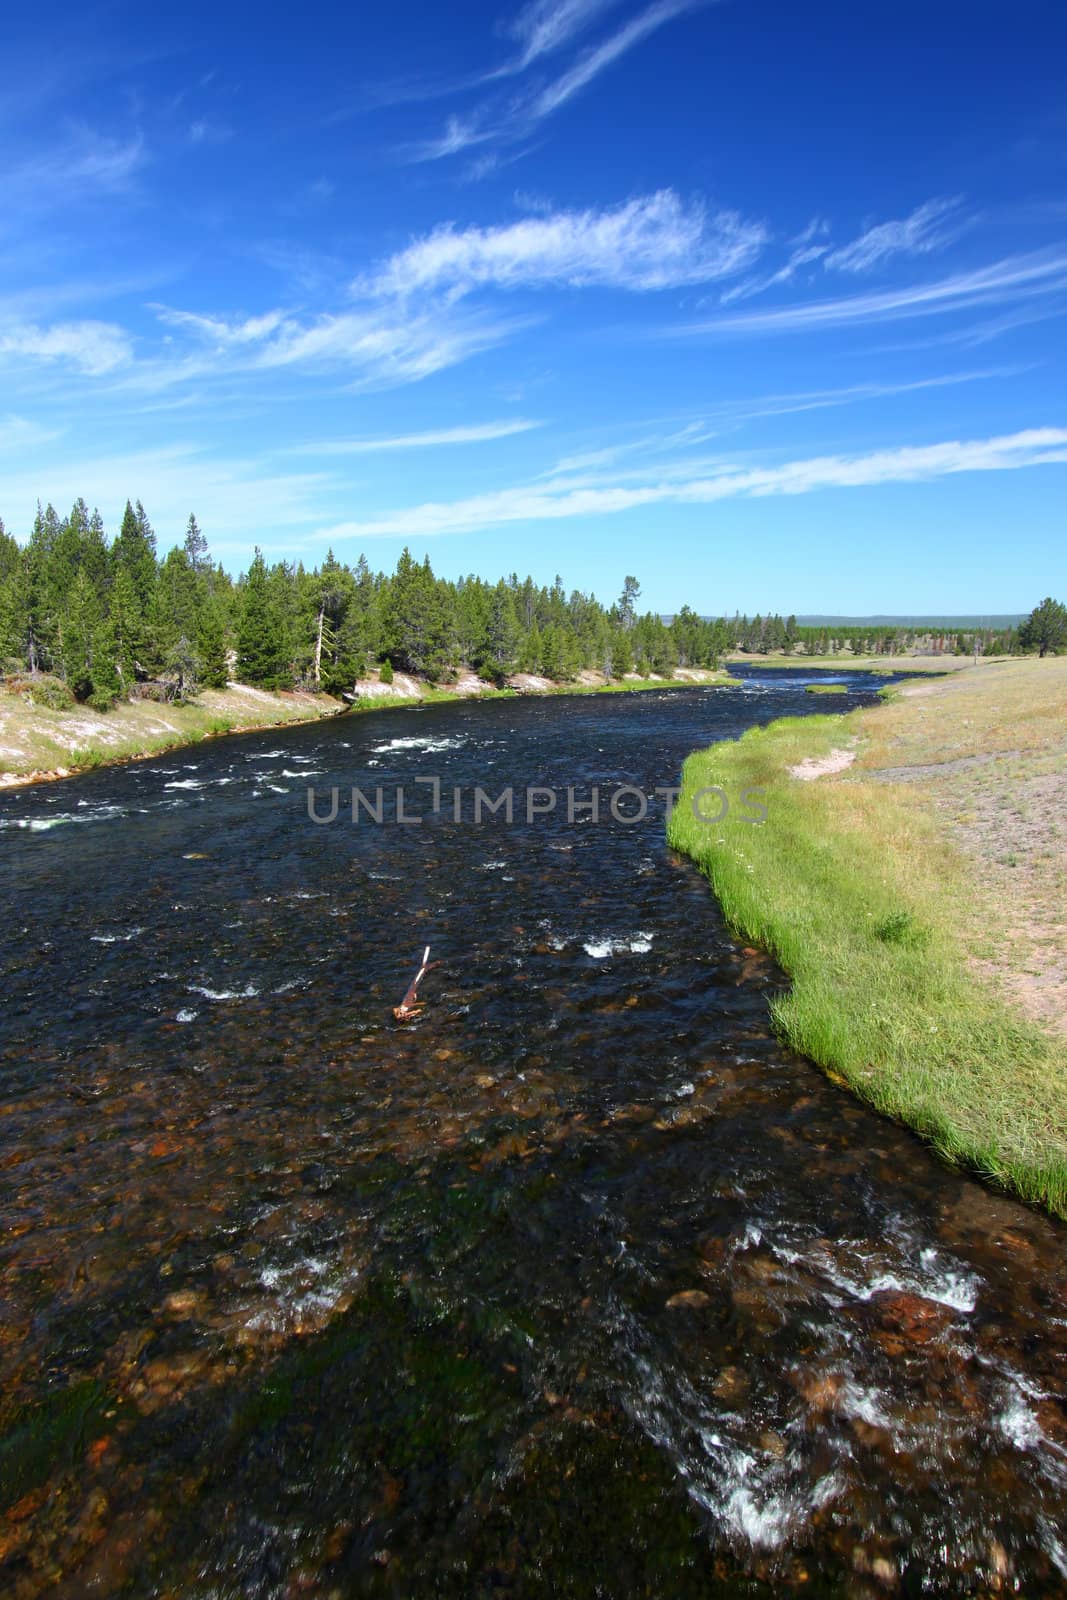 Firehole River flows through Yellowstone National Park on a beautiful sunny day.